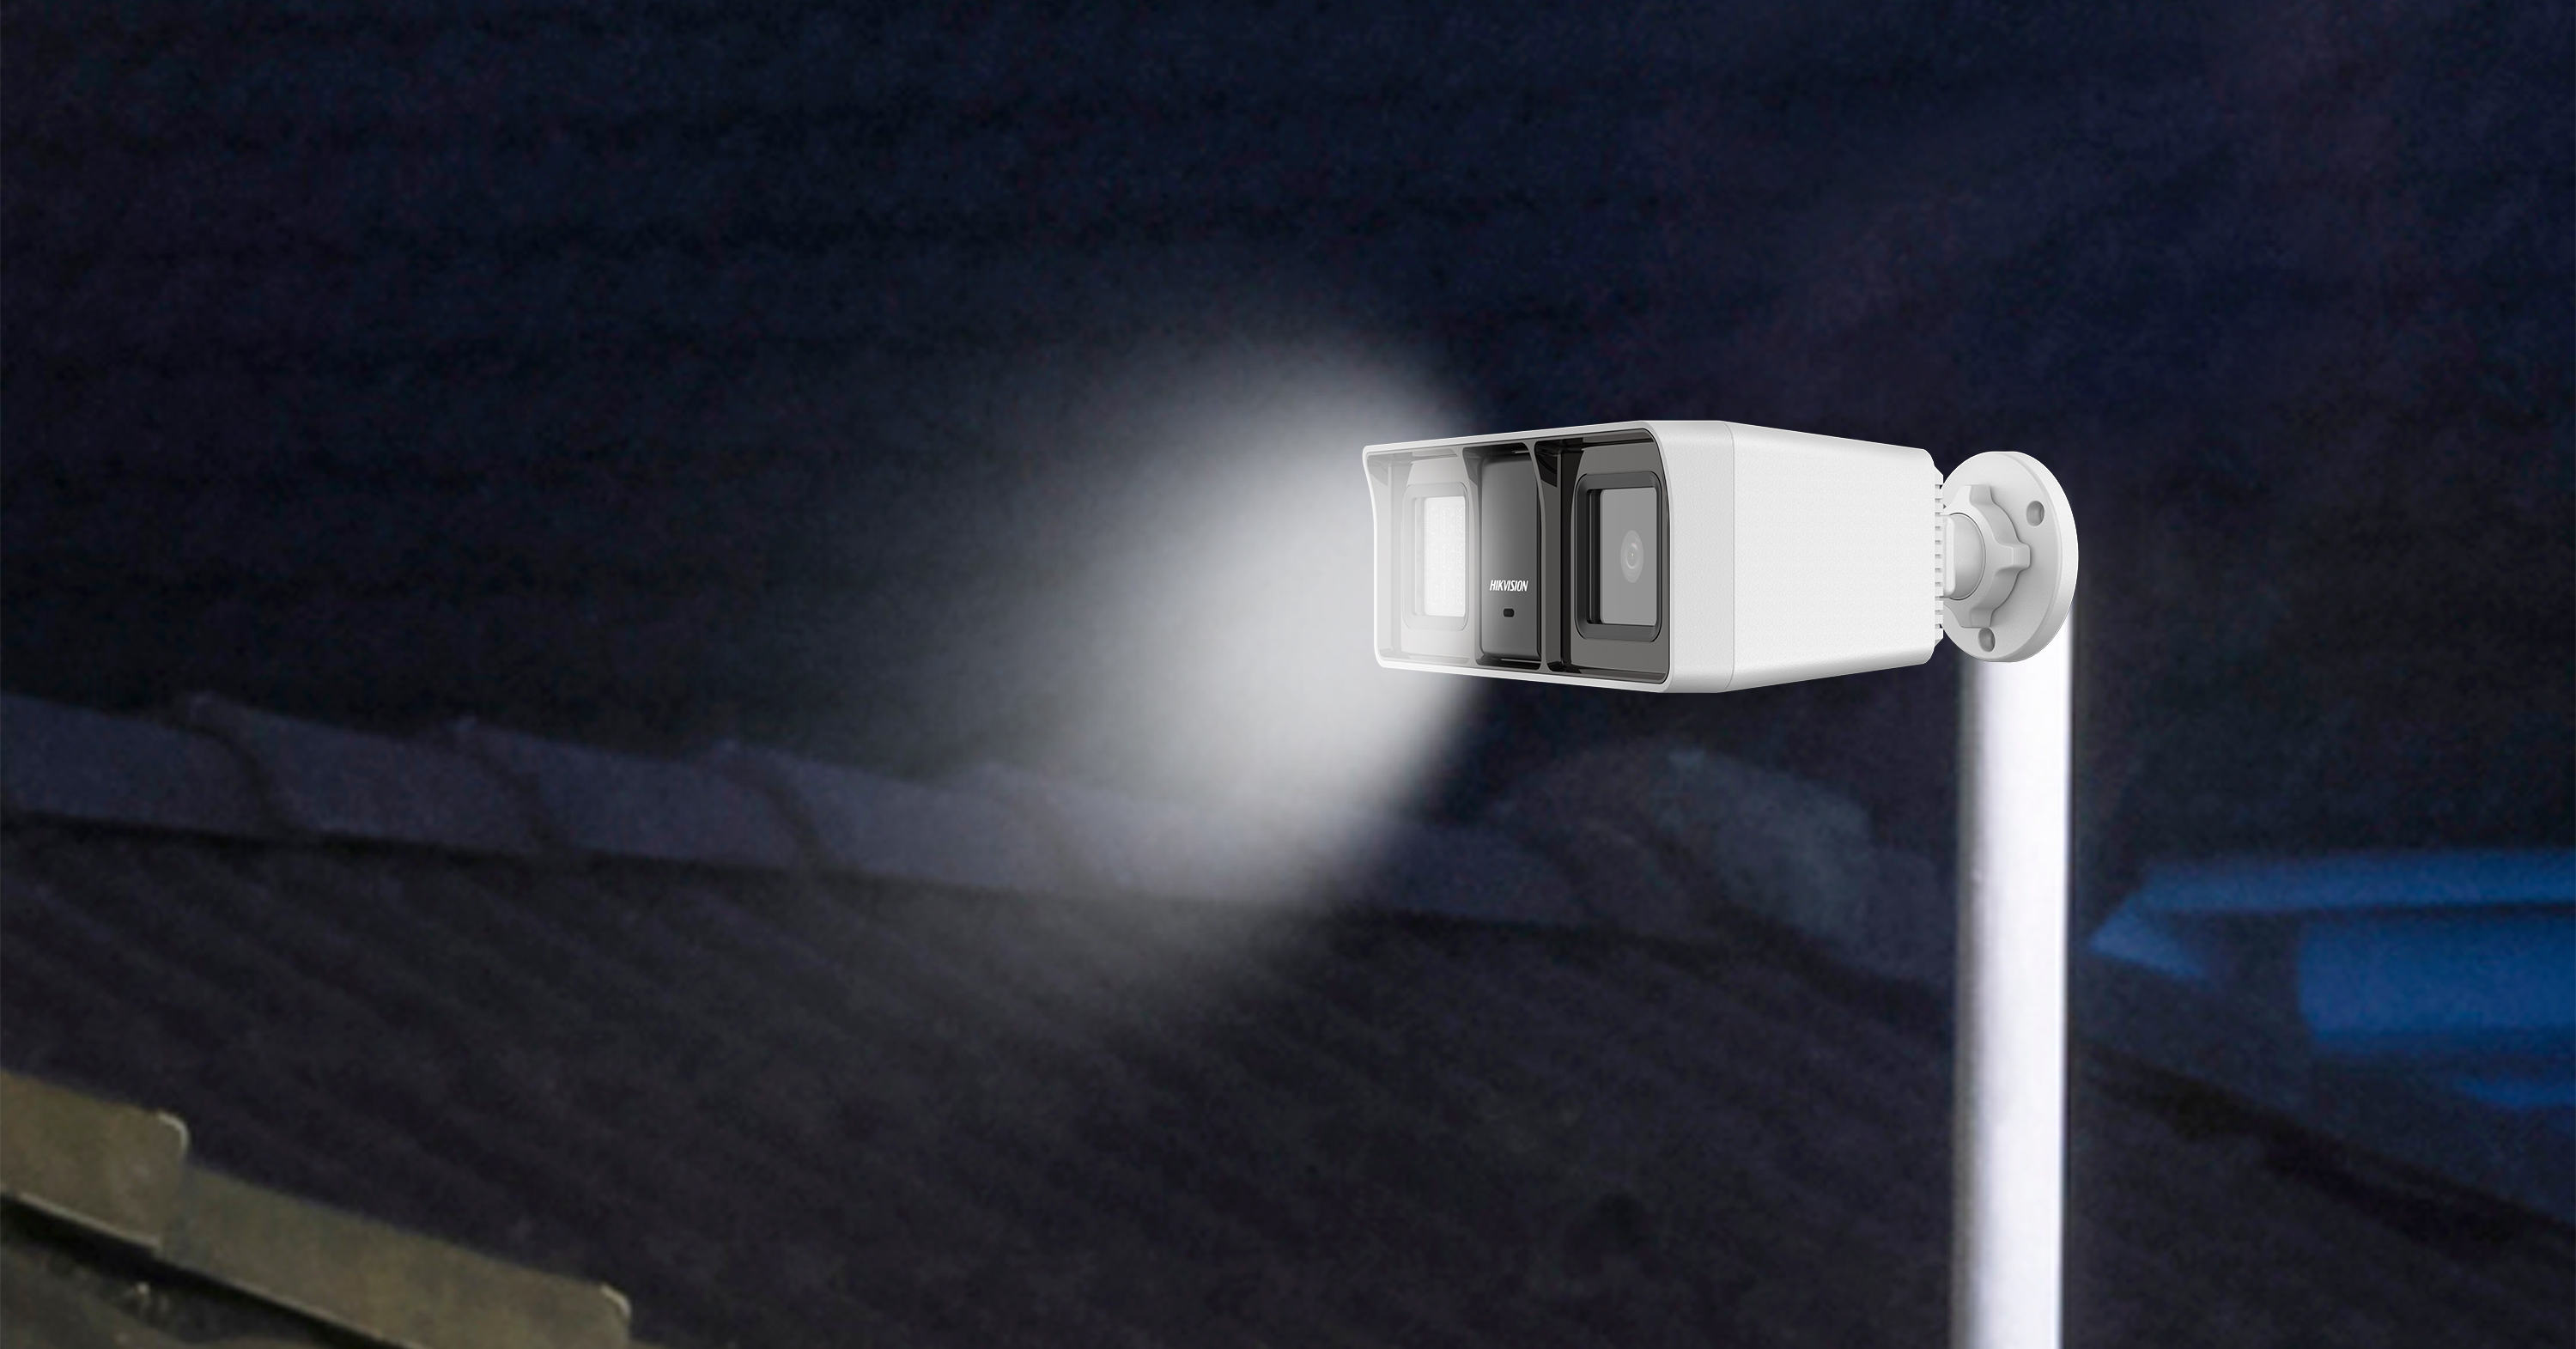  Hikvision India Introduces Turbo HD Lamp Camera for a wide range of use